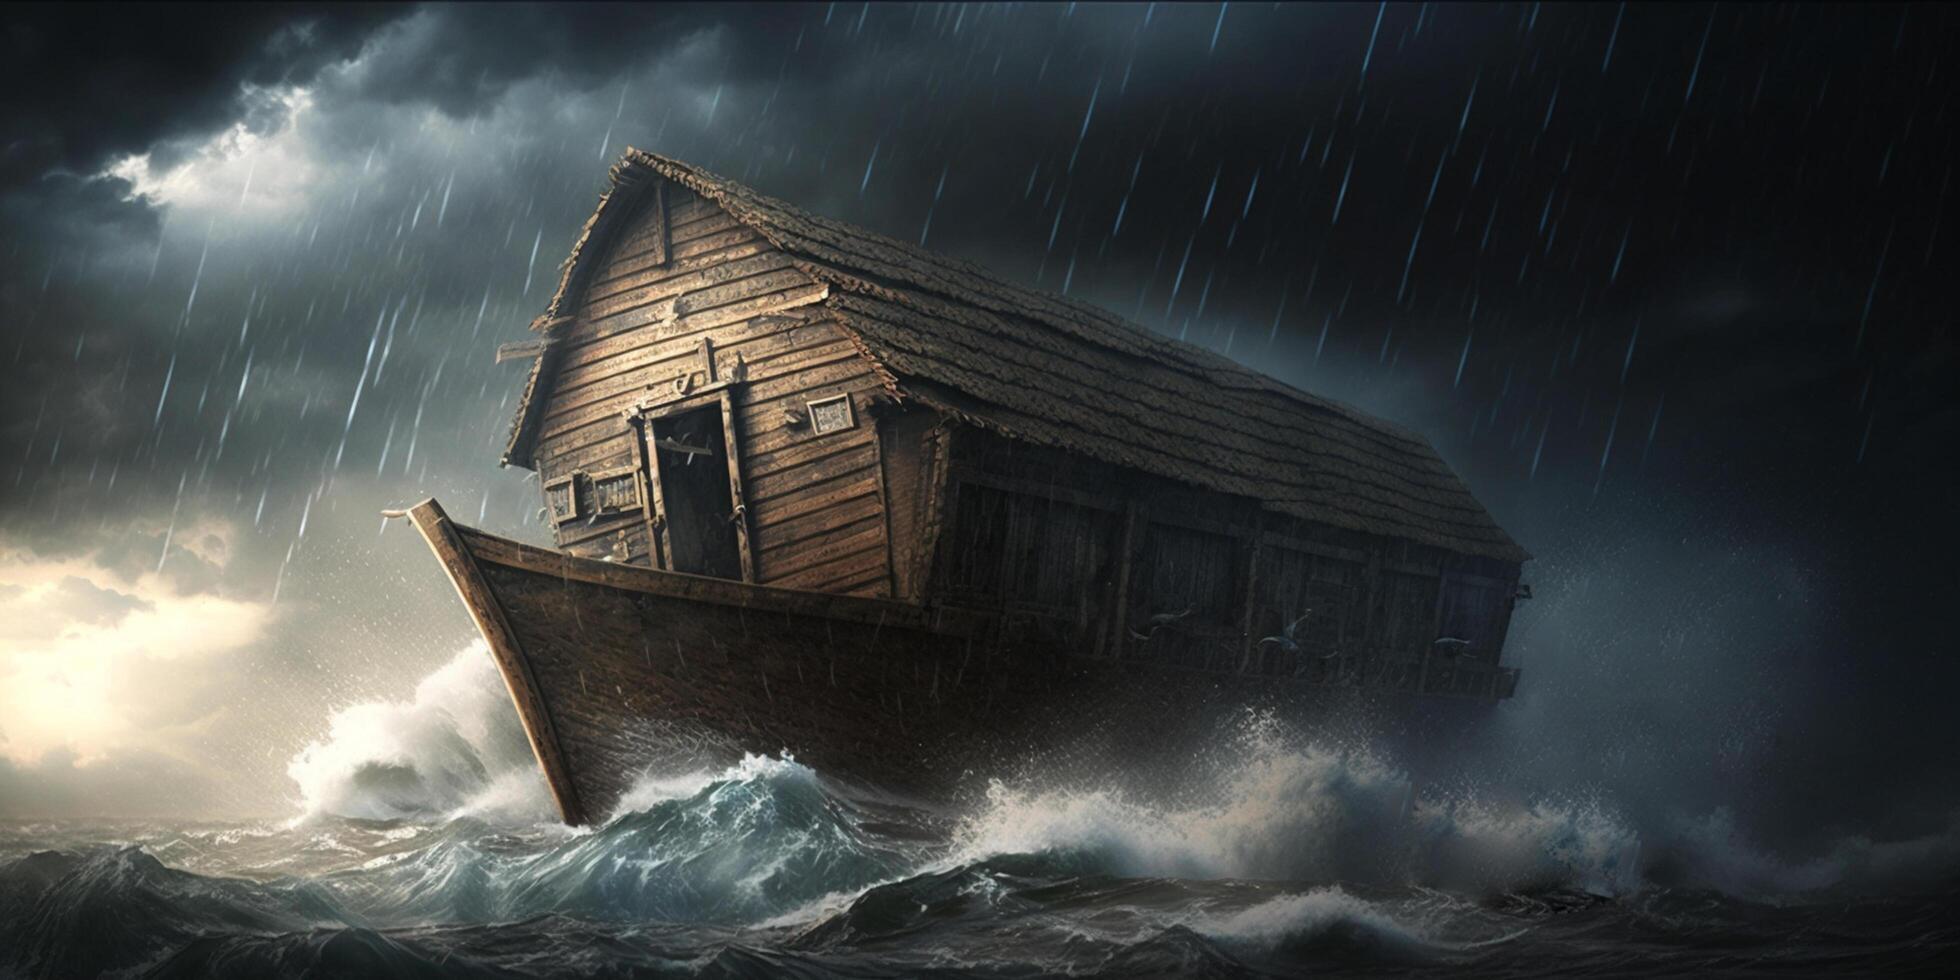 Illustration of Noah's Ark on the stormy sea content photo